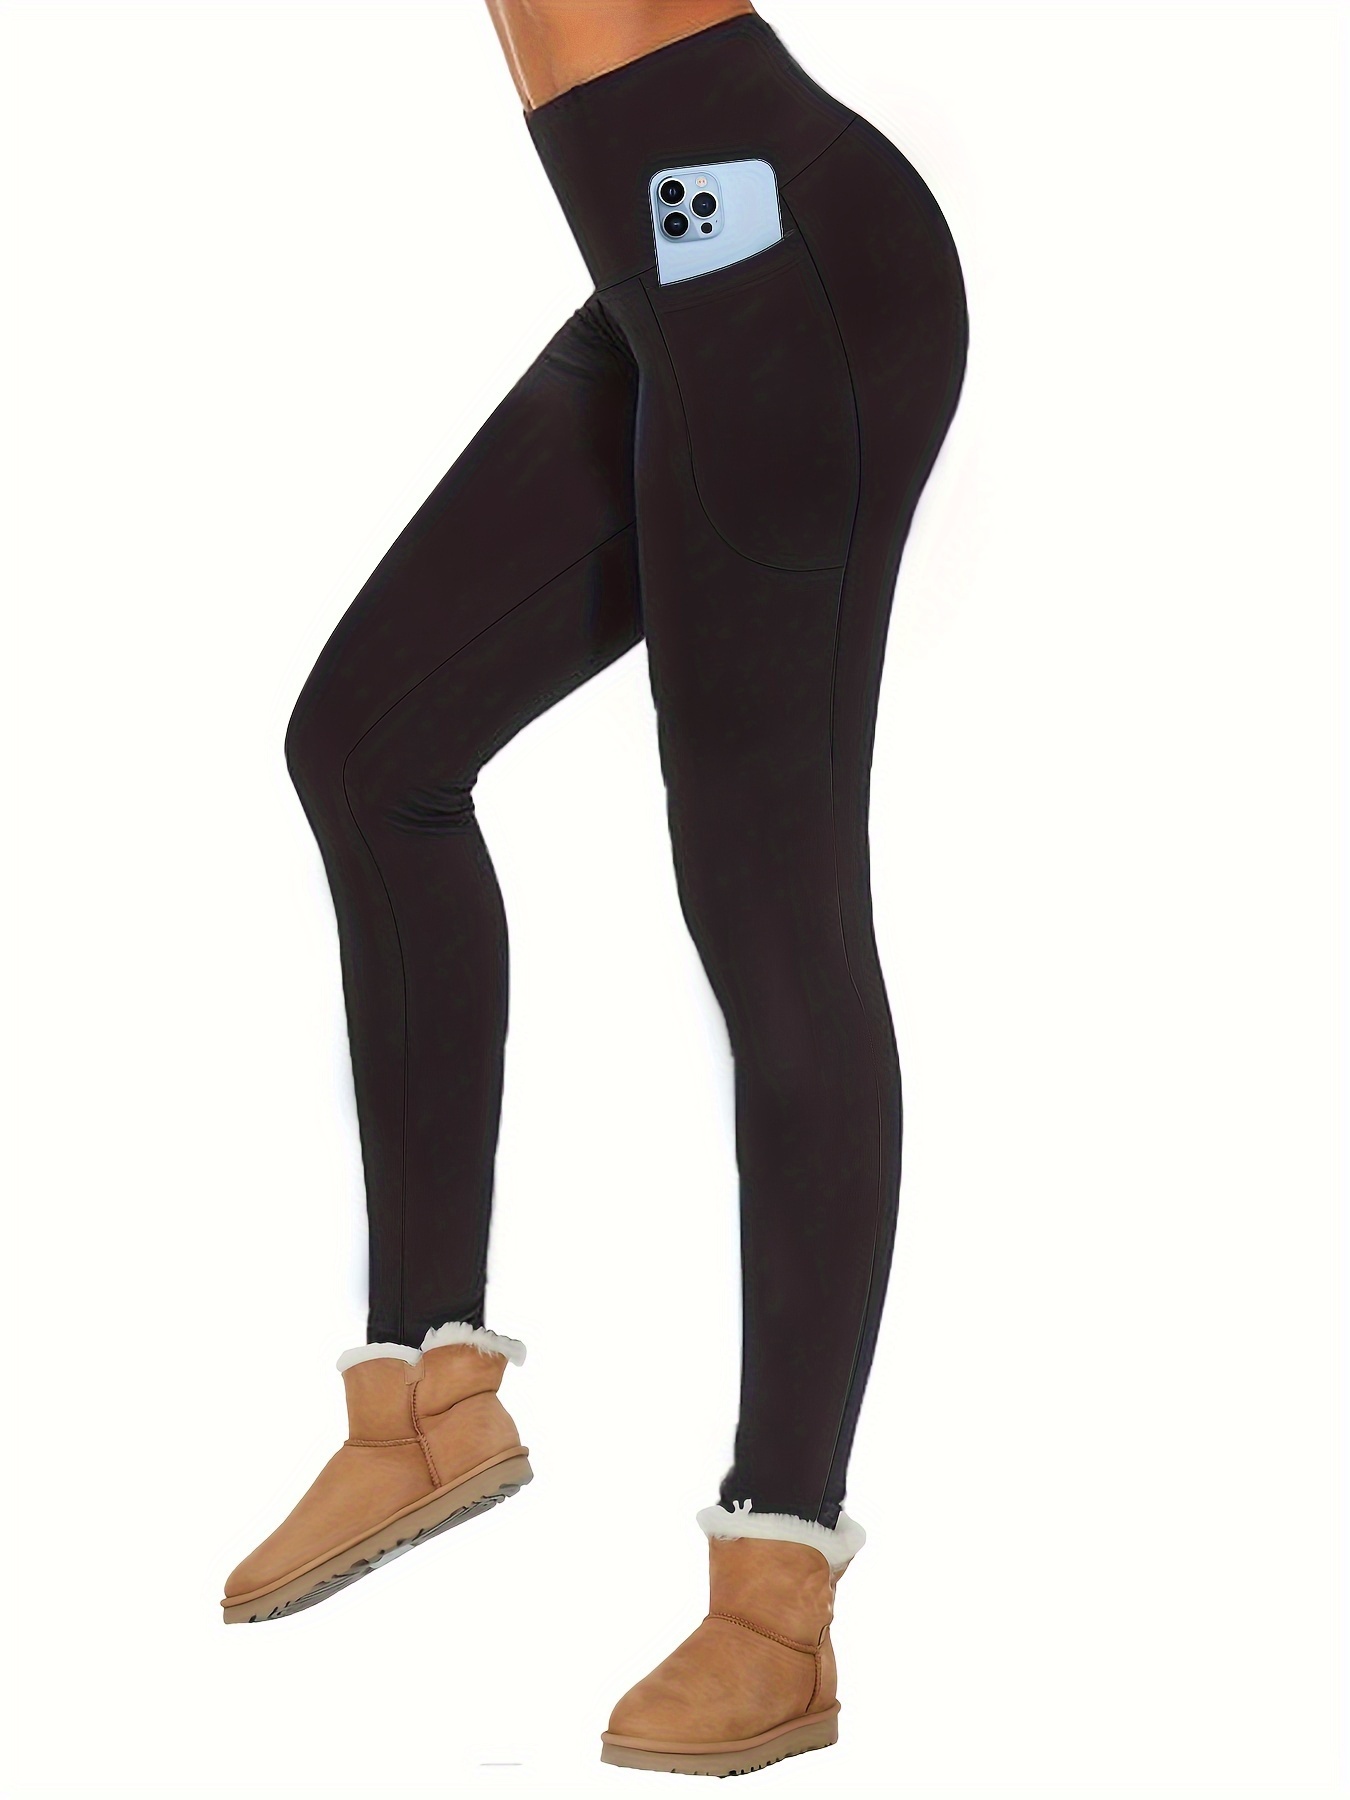 1pc Winter Women'S Fleece-Lined Leggings With Pockets, Thick